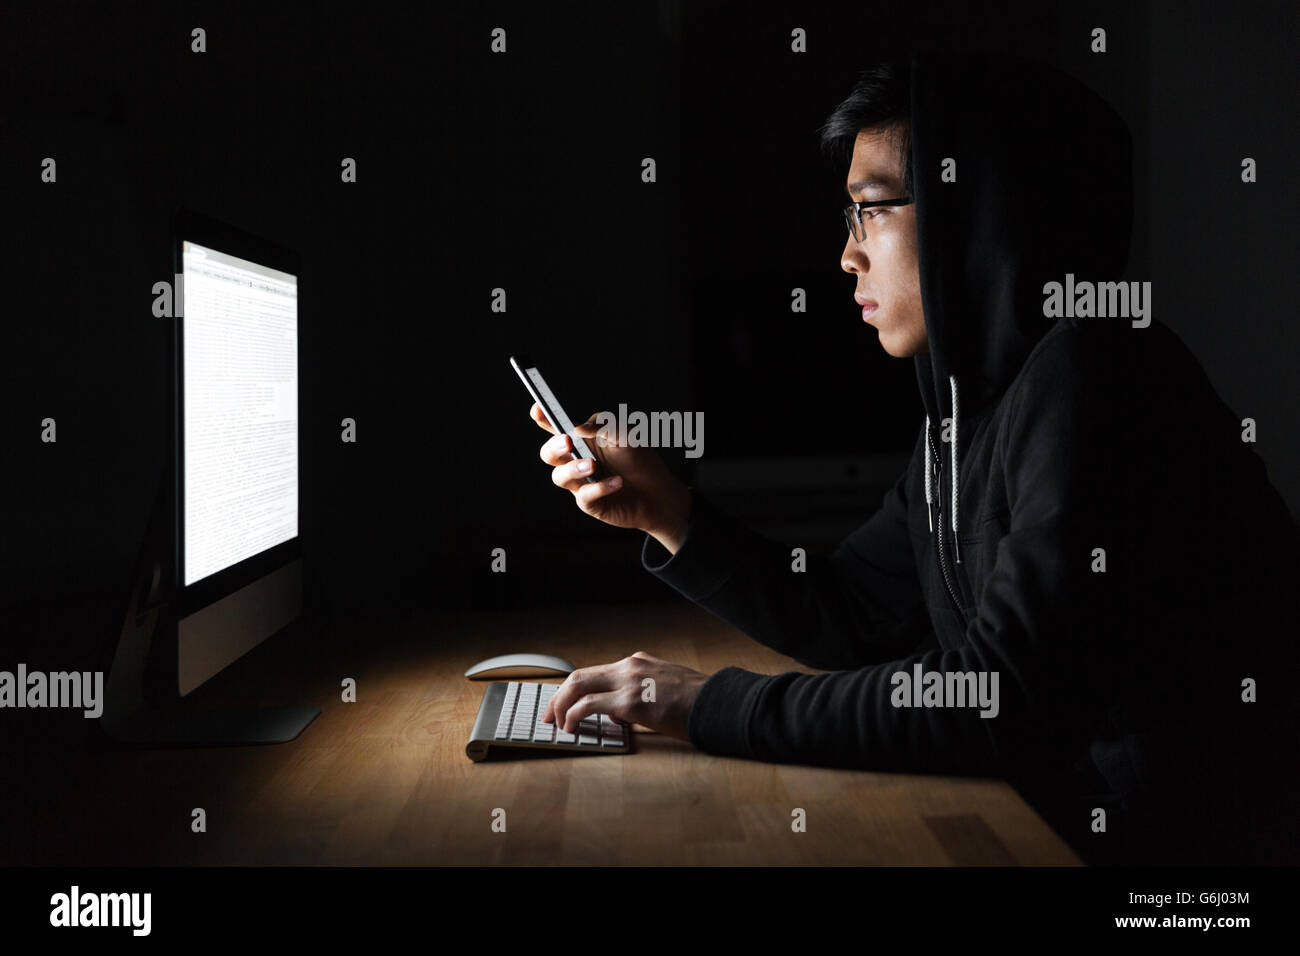 Serious young hacker using laptop and mobile phone in dark room Stock Photo